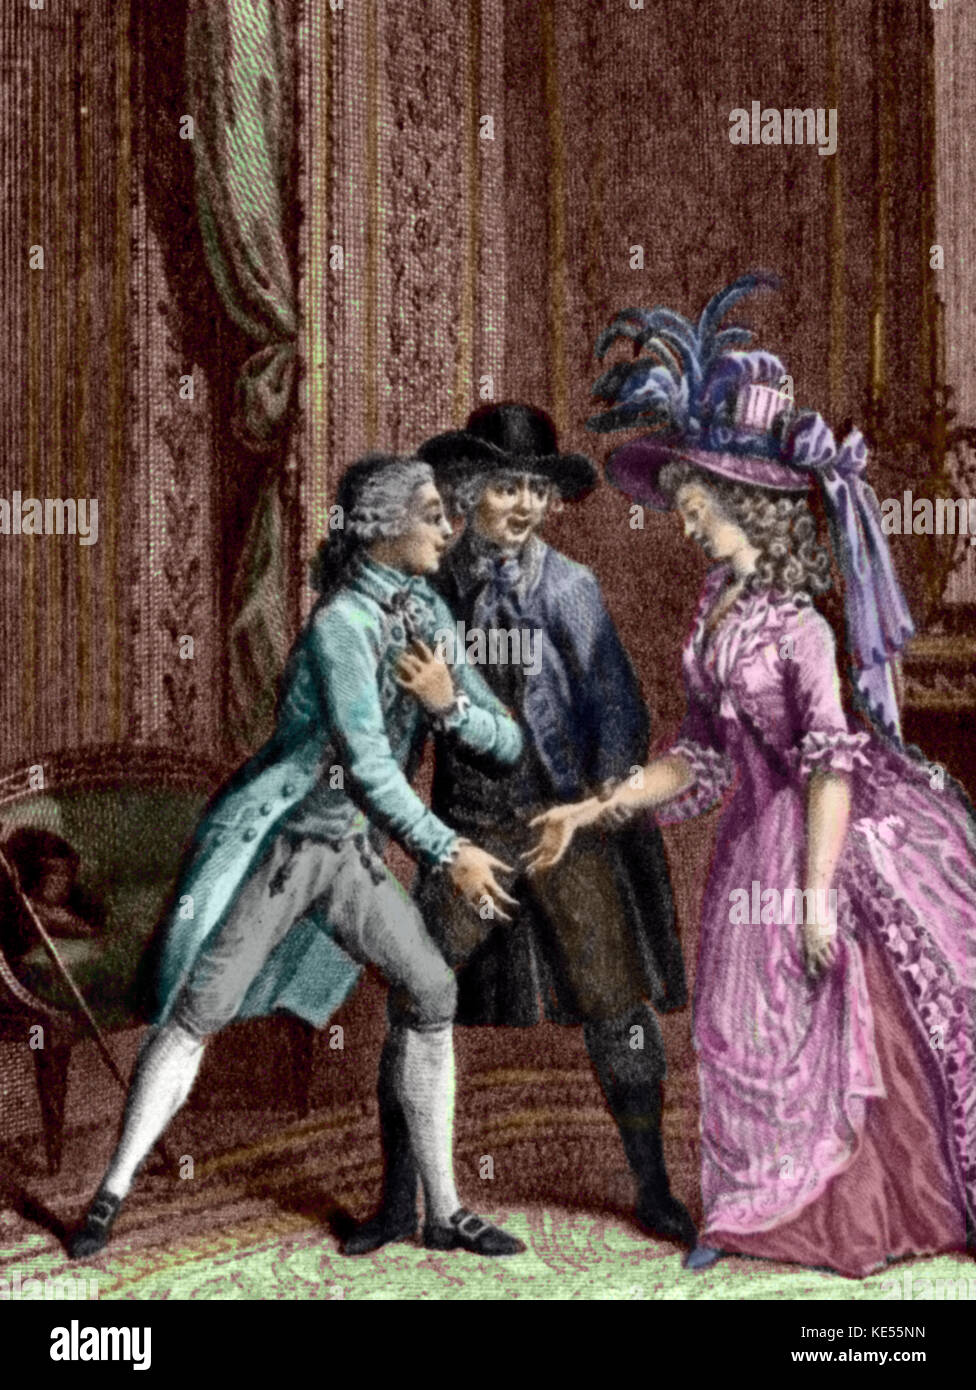 Francois Andre Danican Philidor 's opera Tom Jones - text by Poinsinet 1765 - illustration from the book by Jacob Fossoyeux 1765. 'The engagement of Tom and Sophie.' French composer, chess player : 7 September 1726 - 24 August 1795. Colourised version. Stock Photo